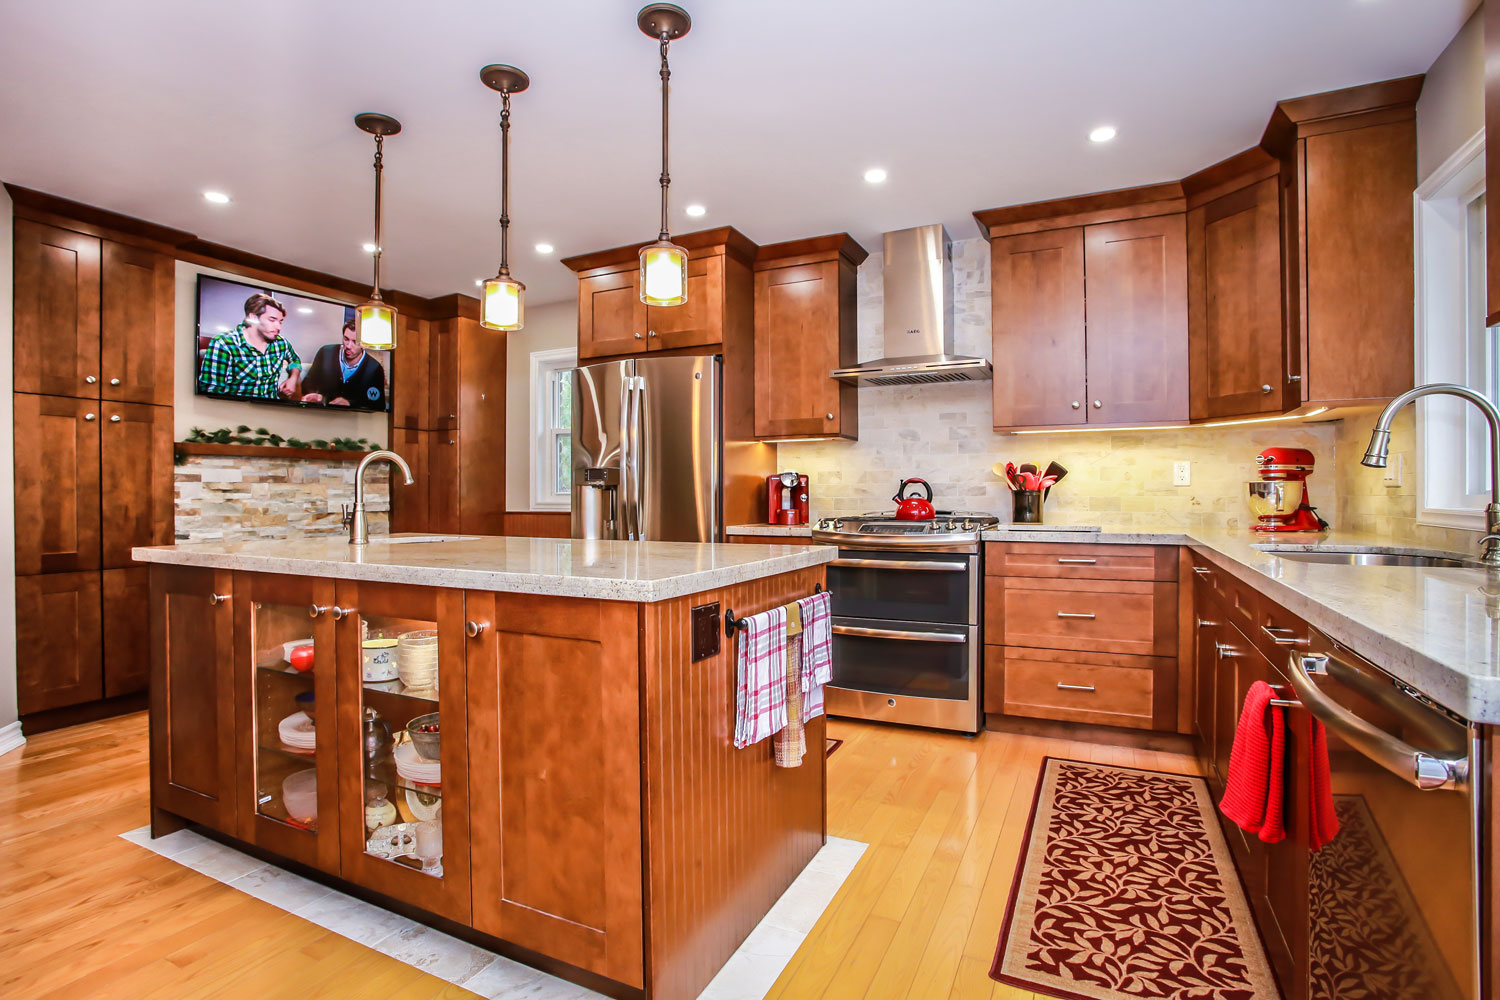 Modern counry kitchen design with cherry oak cabinets, stainless steel appliances, and a light hardwood floor - Total Living Concepts barrie ontario